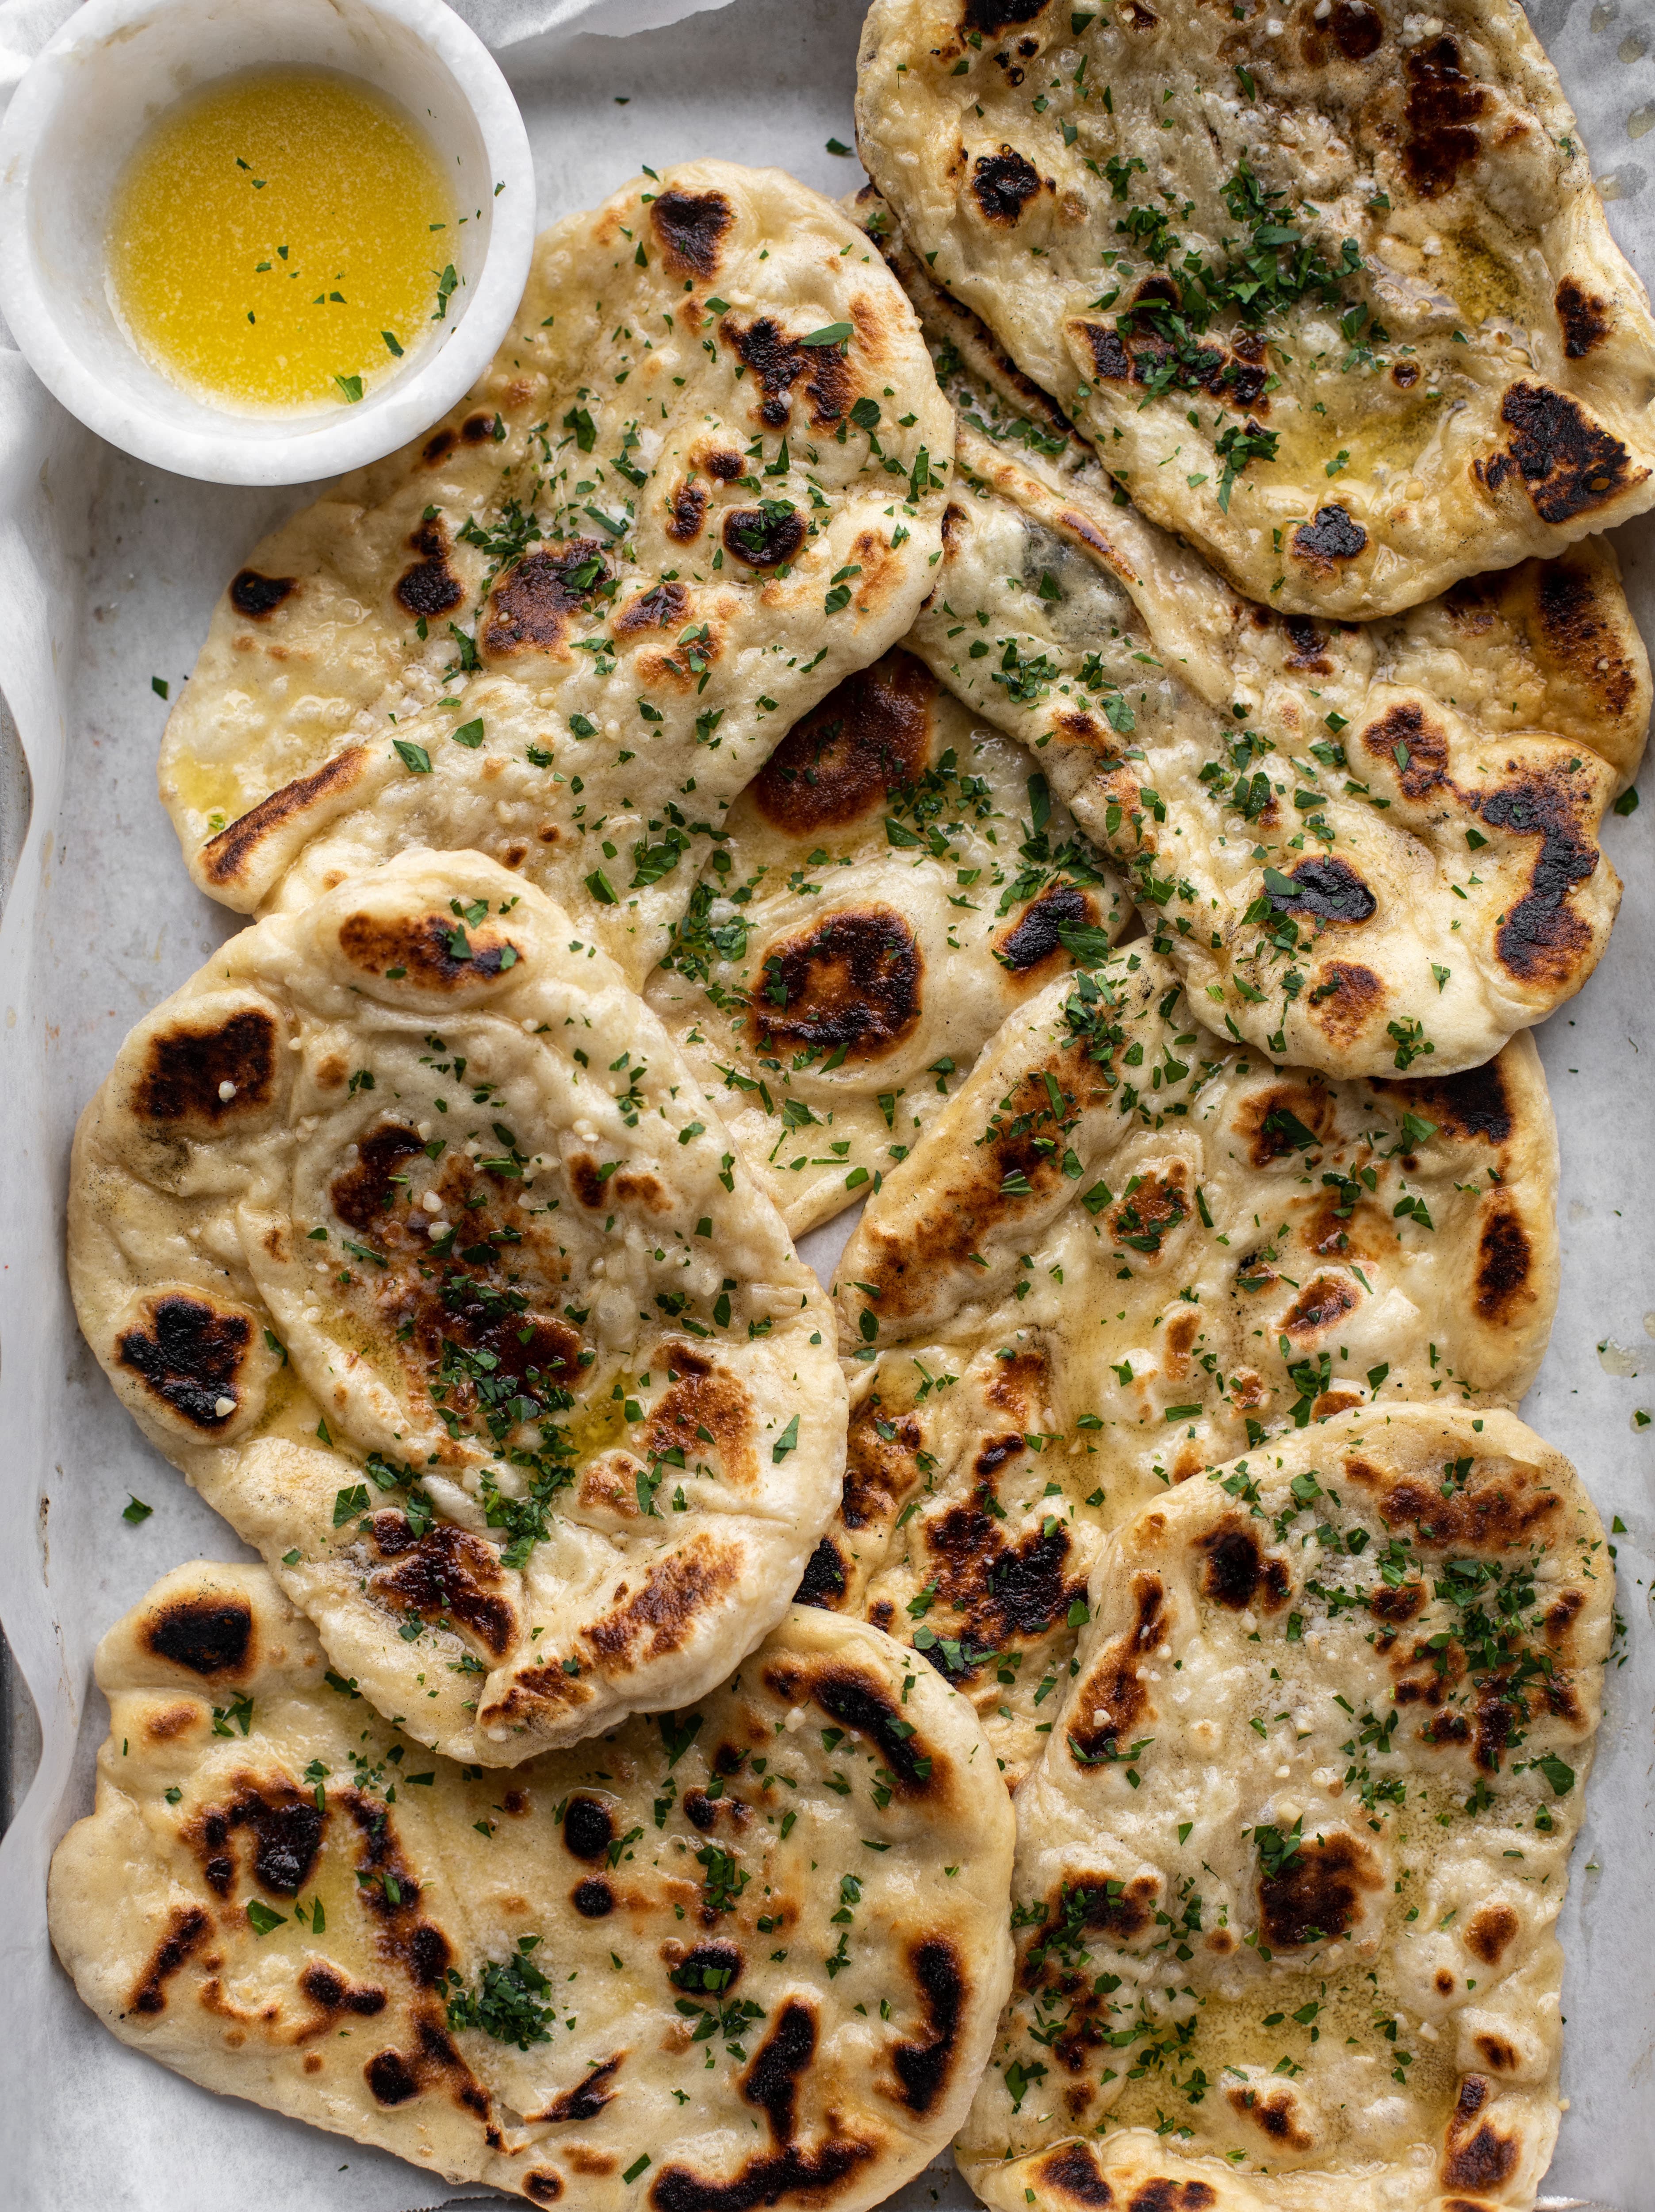 This garlic butter naan bread recipe is divine! It uses baking powder and baking soda instead of yeast and is drenched with garlic butter. So delicious!